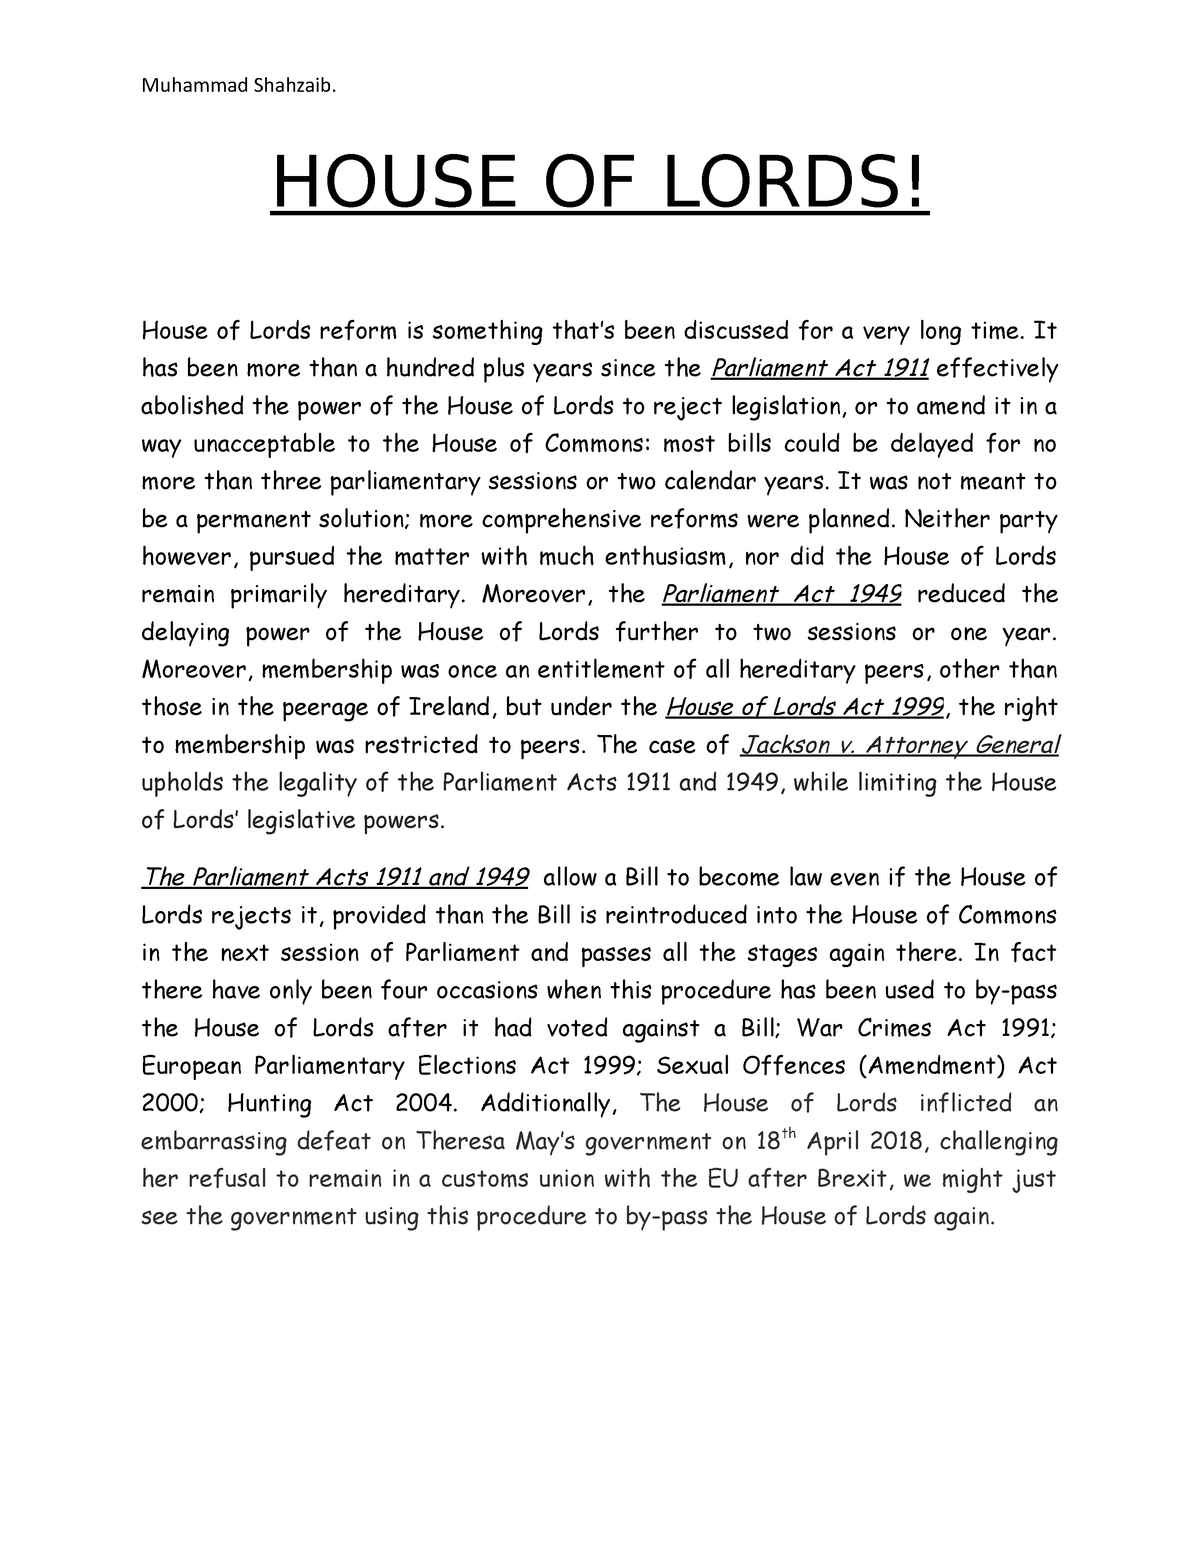 write an essay on house of lords